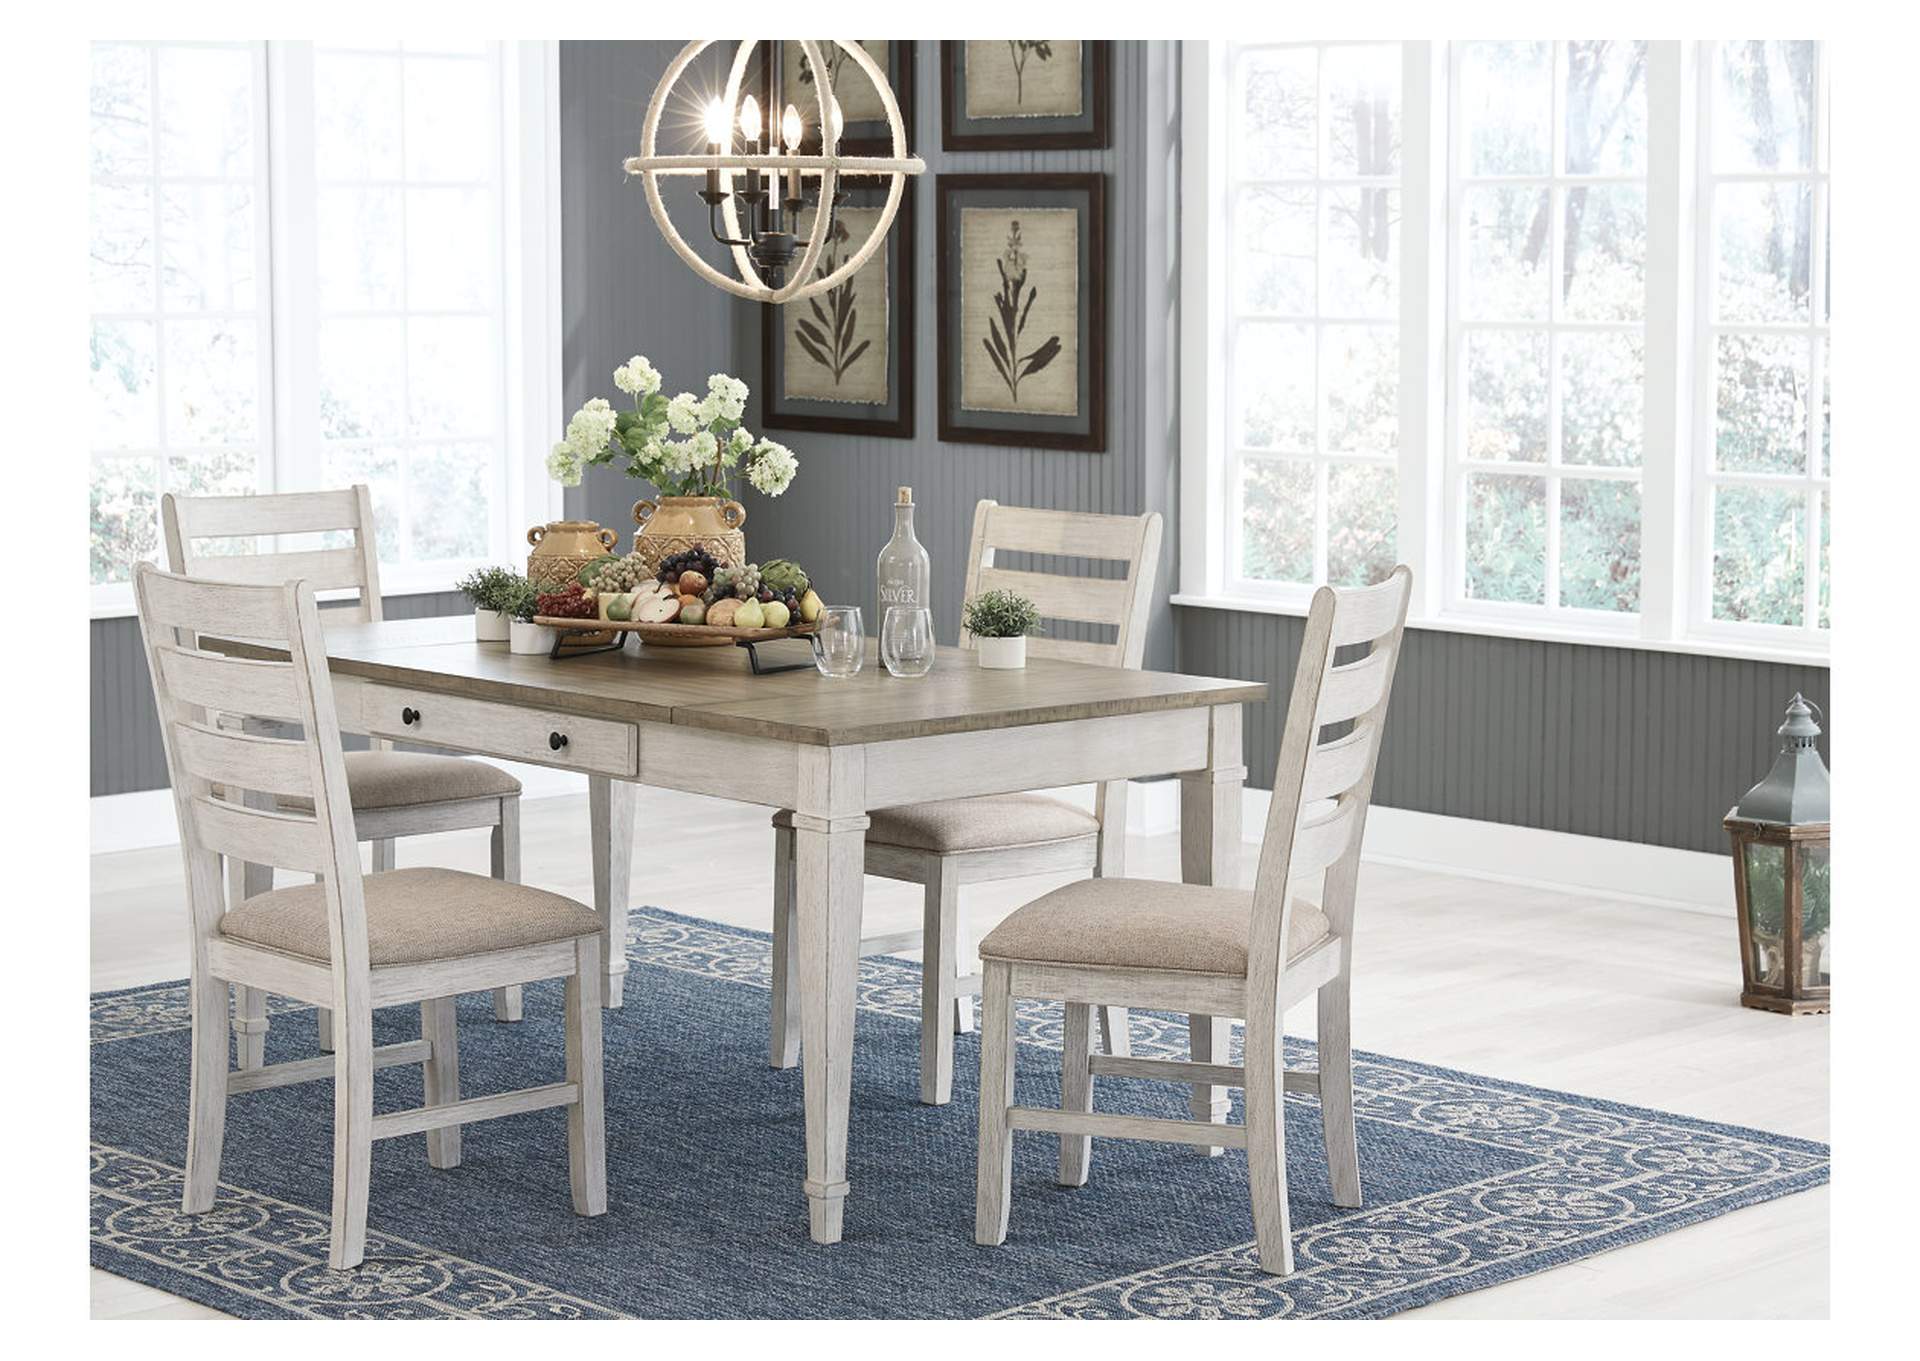 Skempton Dining Table and 4 Chairs,Signature Design By Ashley